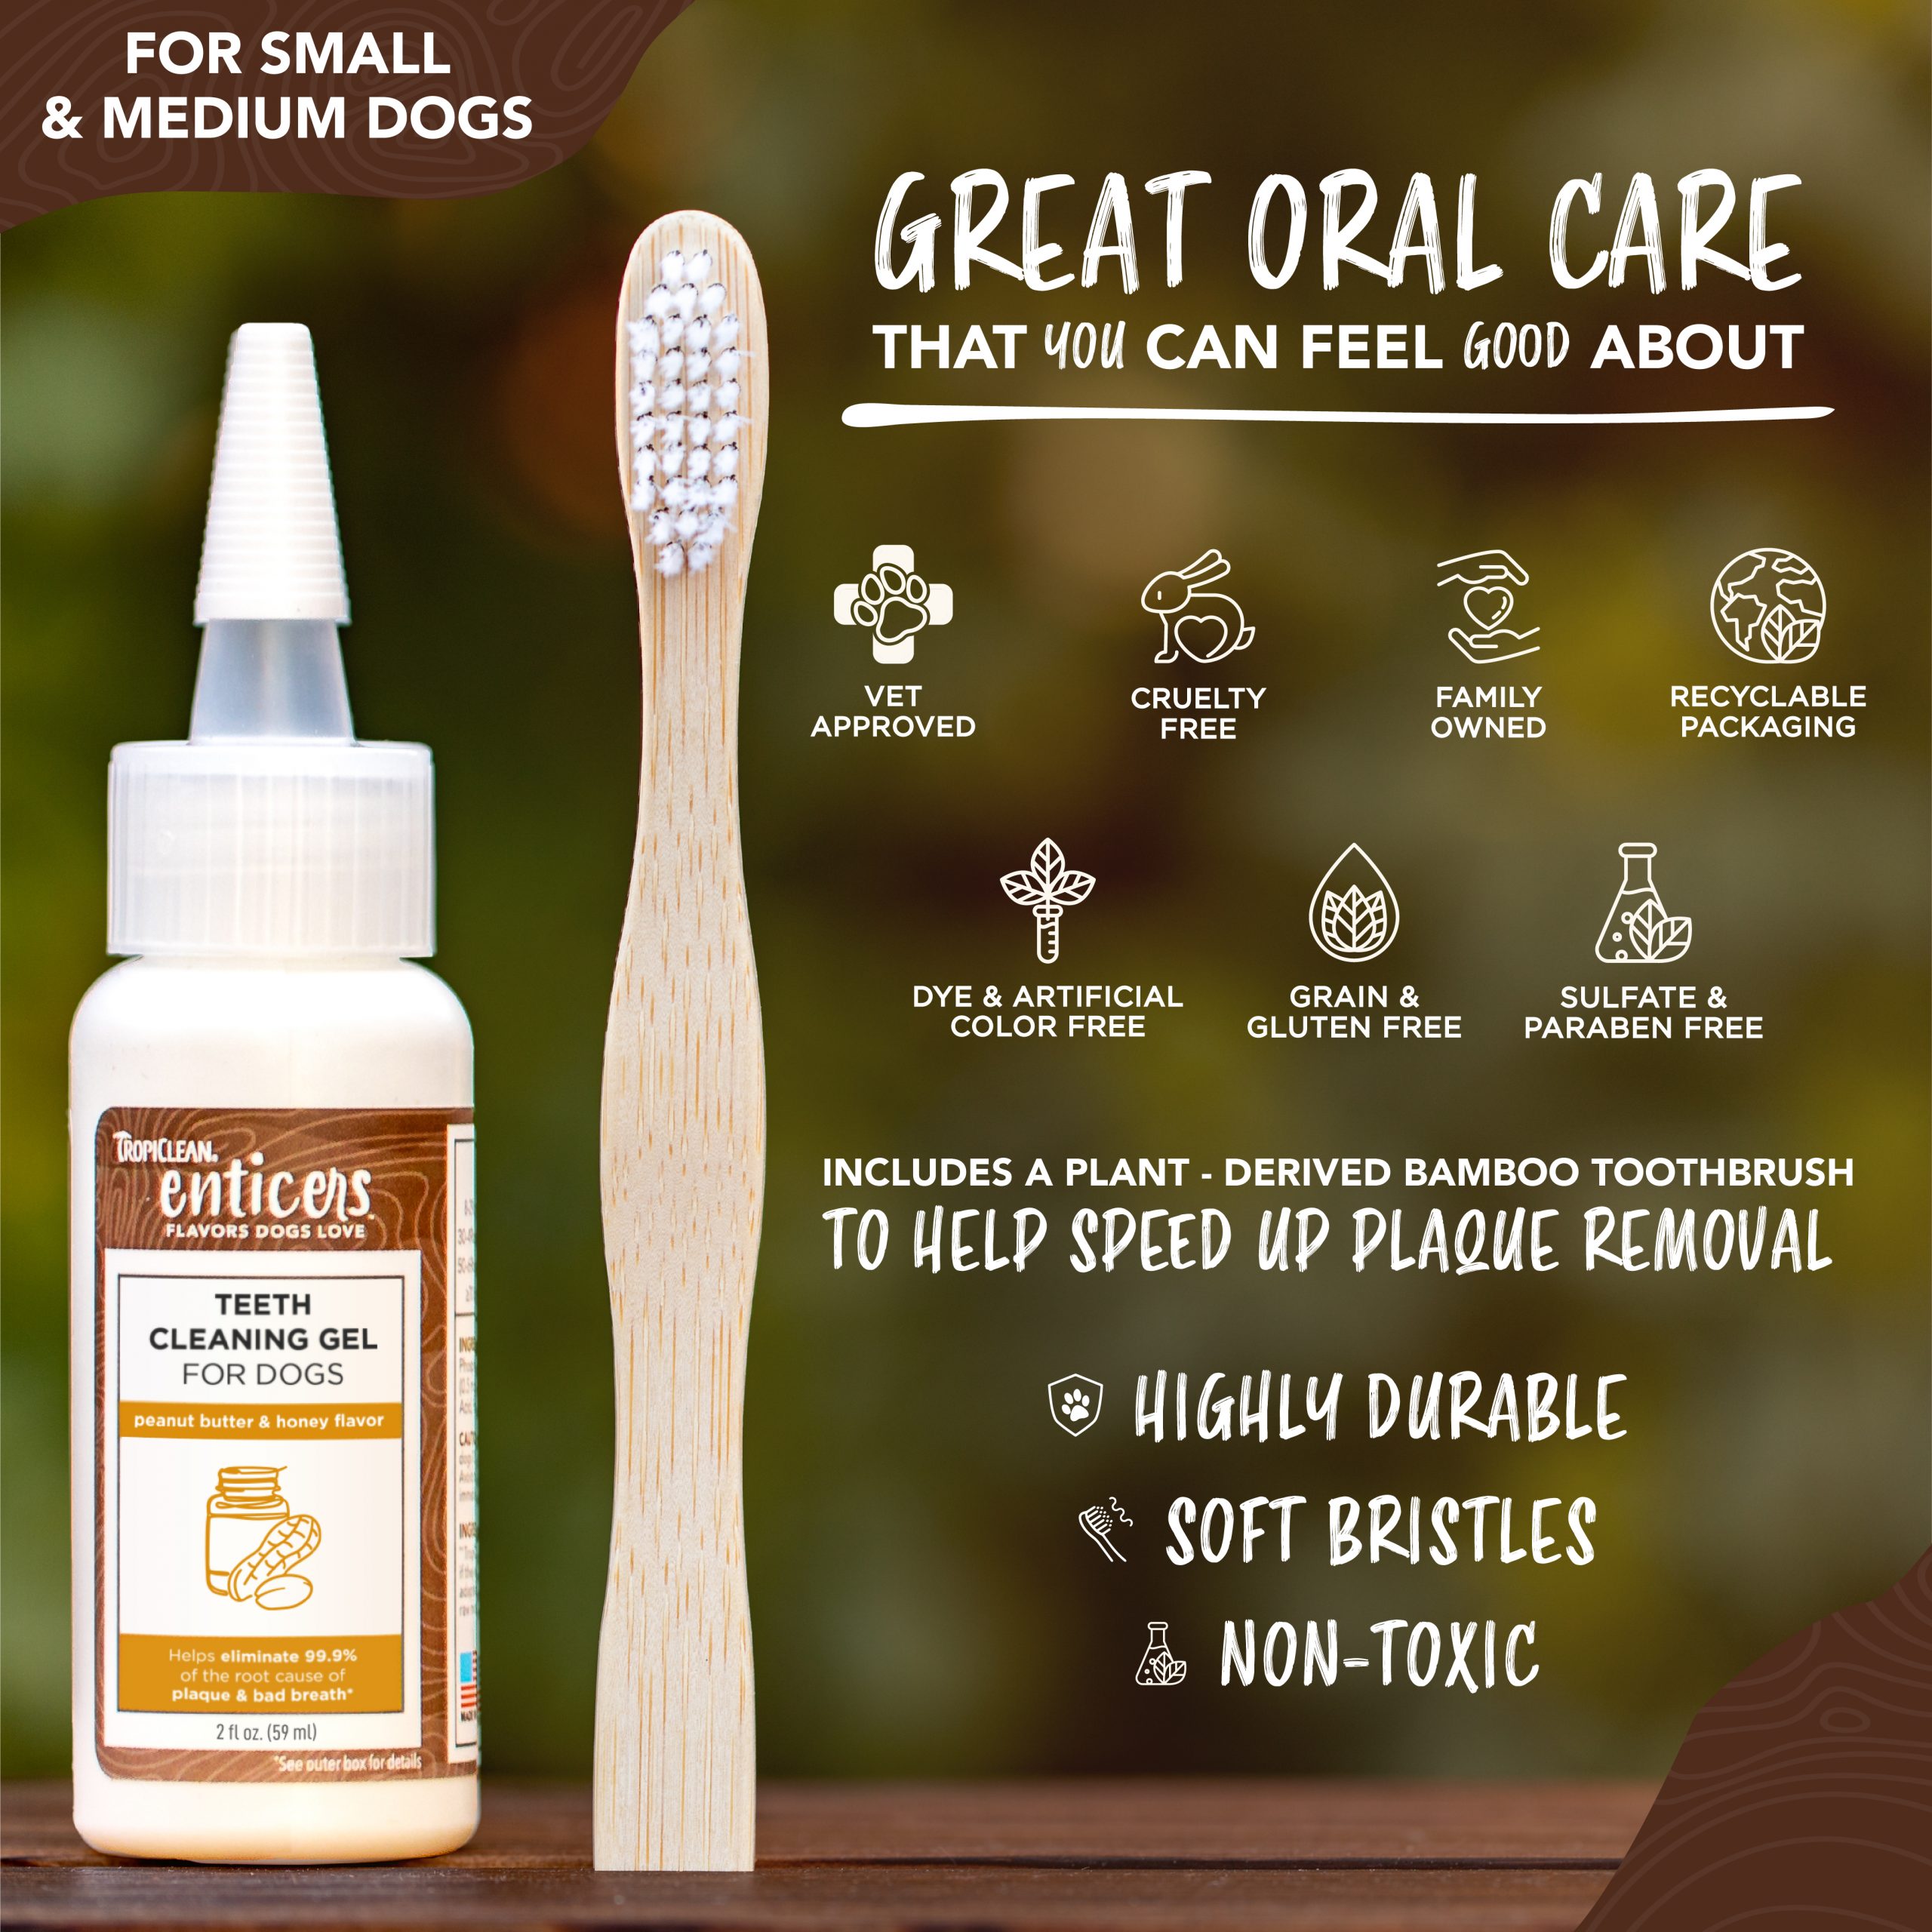 Teeth Cleaning Gel & Toothbrush for Small/Medium Dogs – Peanut Butter & Honey Flavor